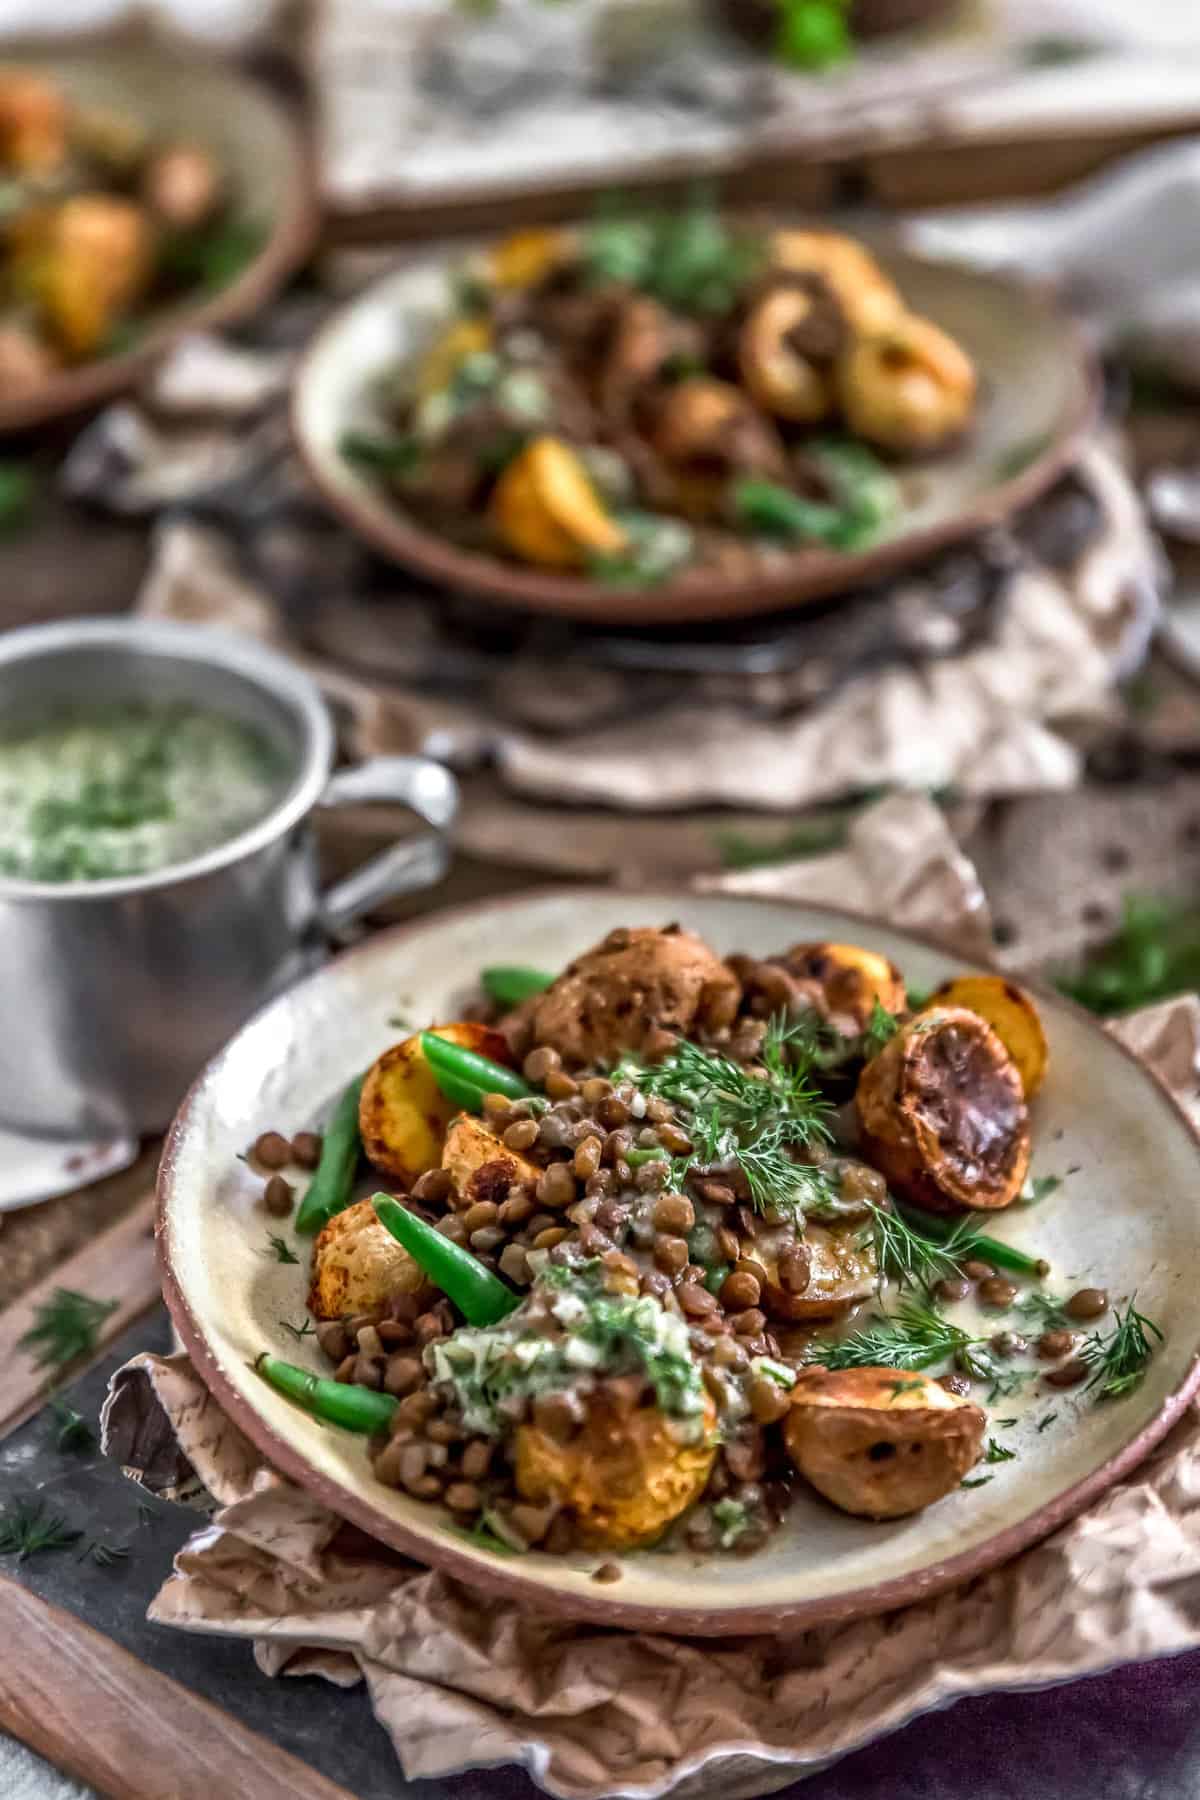 Tablescape of Roasted Potatoes with Seasoned Lentils and Dill Sauce